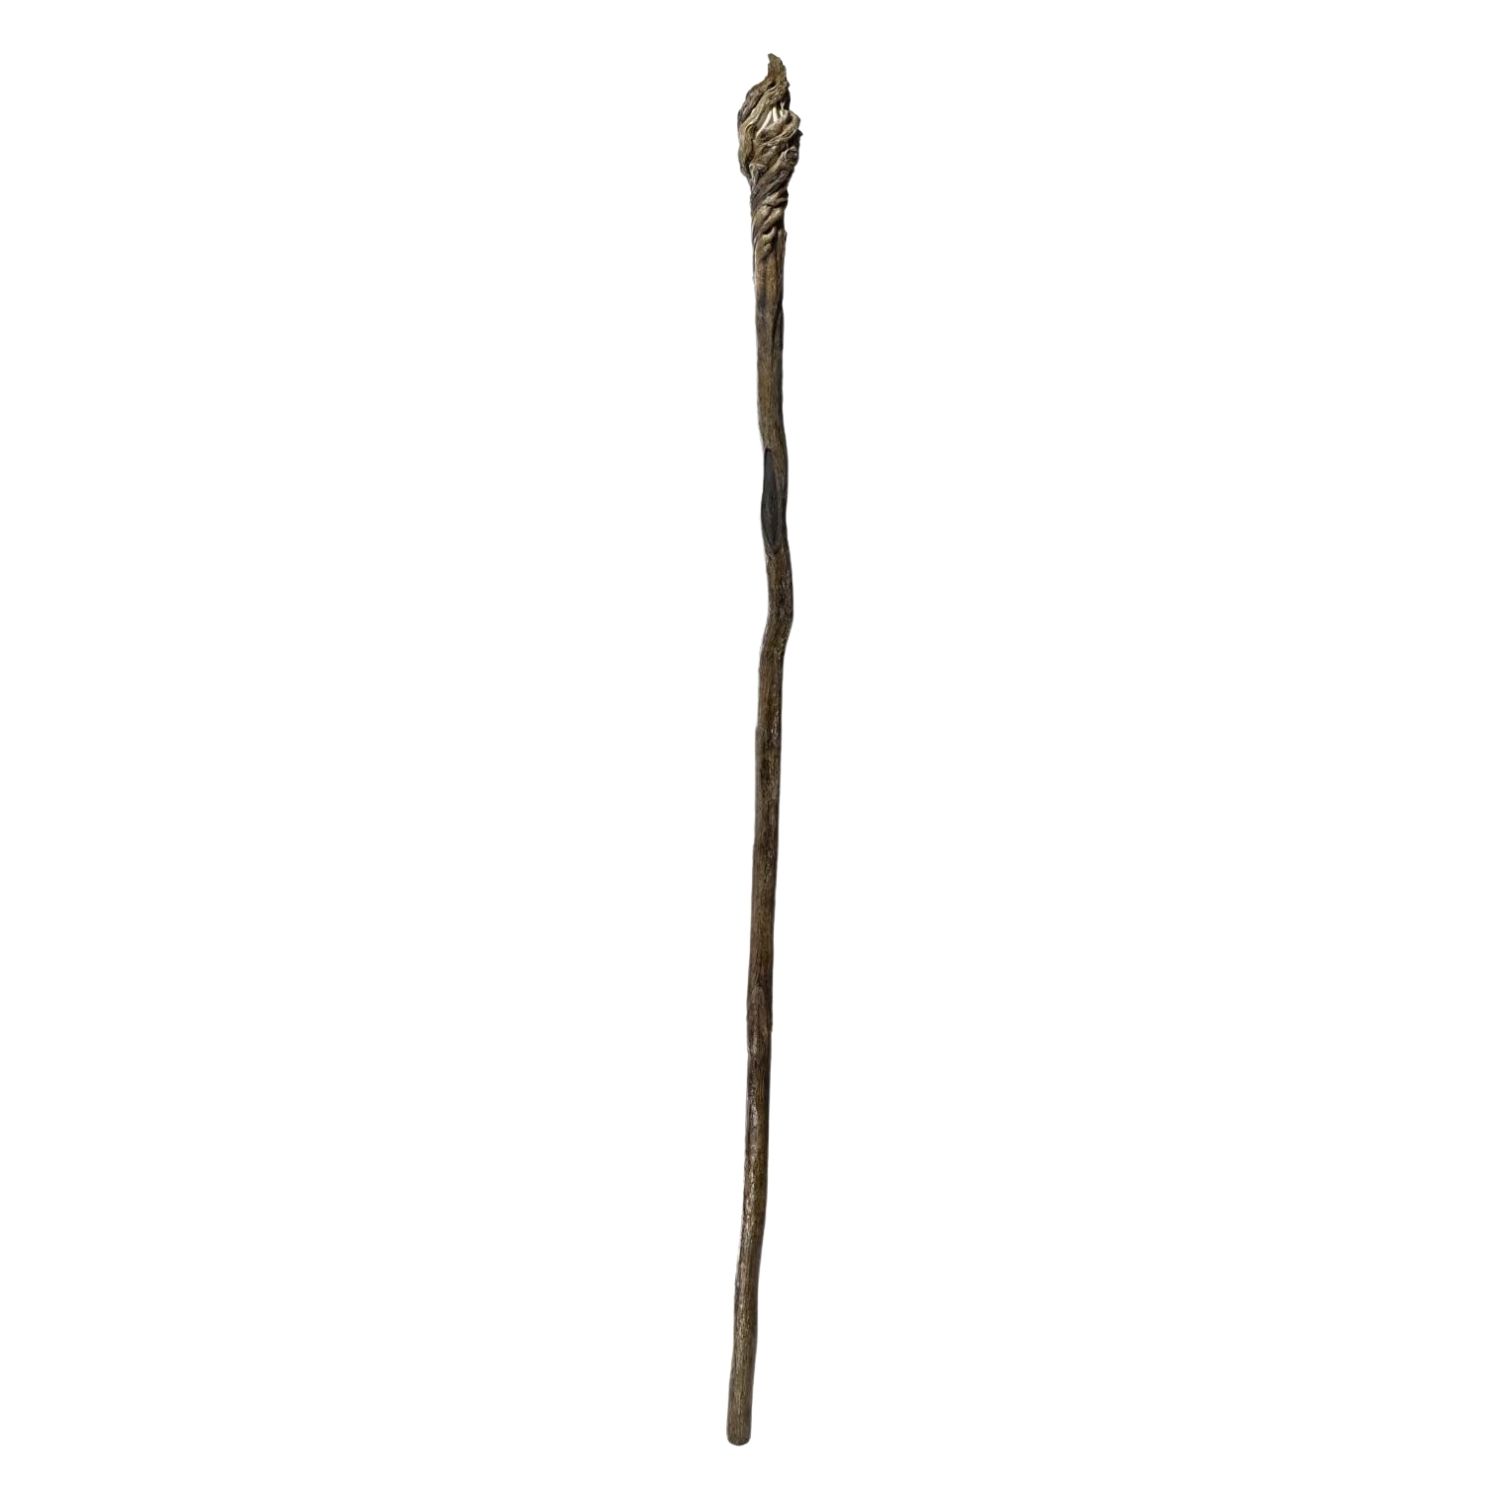 replica staff lord of the rings gandalf 2